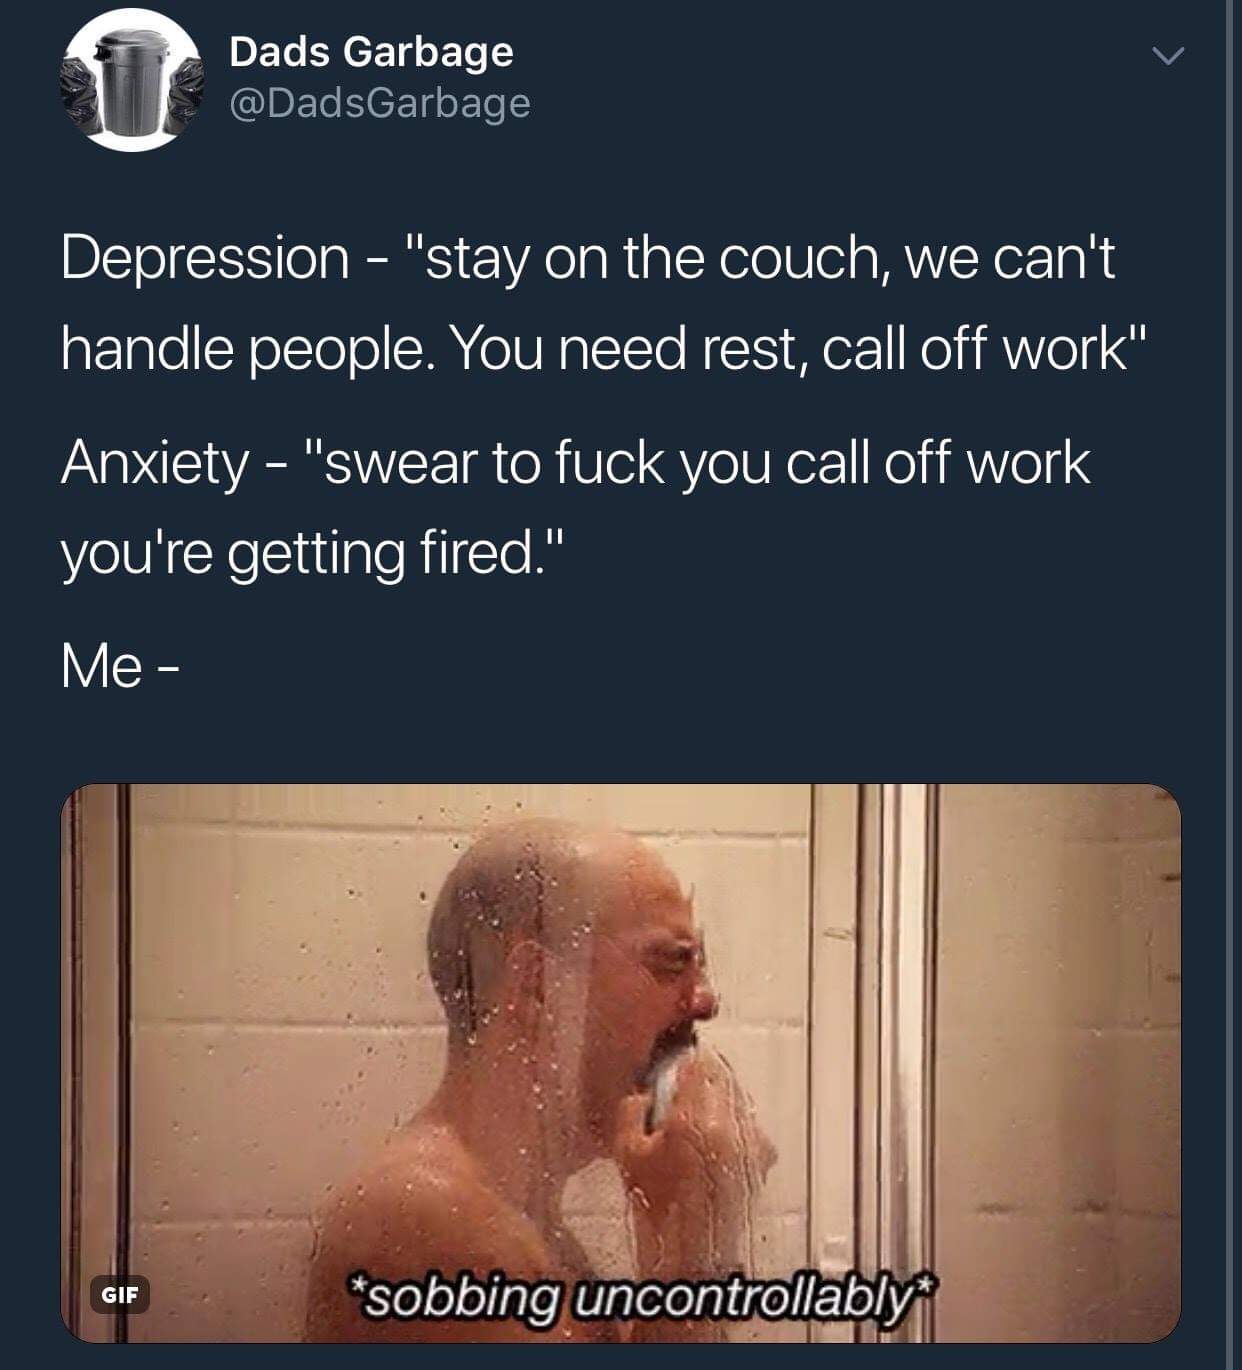 funny depression memes - Dads Garbage Depression "stay on the couch, we can't handle people. You need rest, call off work" Anxiety "swear to fuck you call off work you're getting fired." Me Gif sobbing uncontrollably